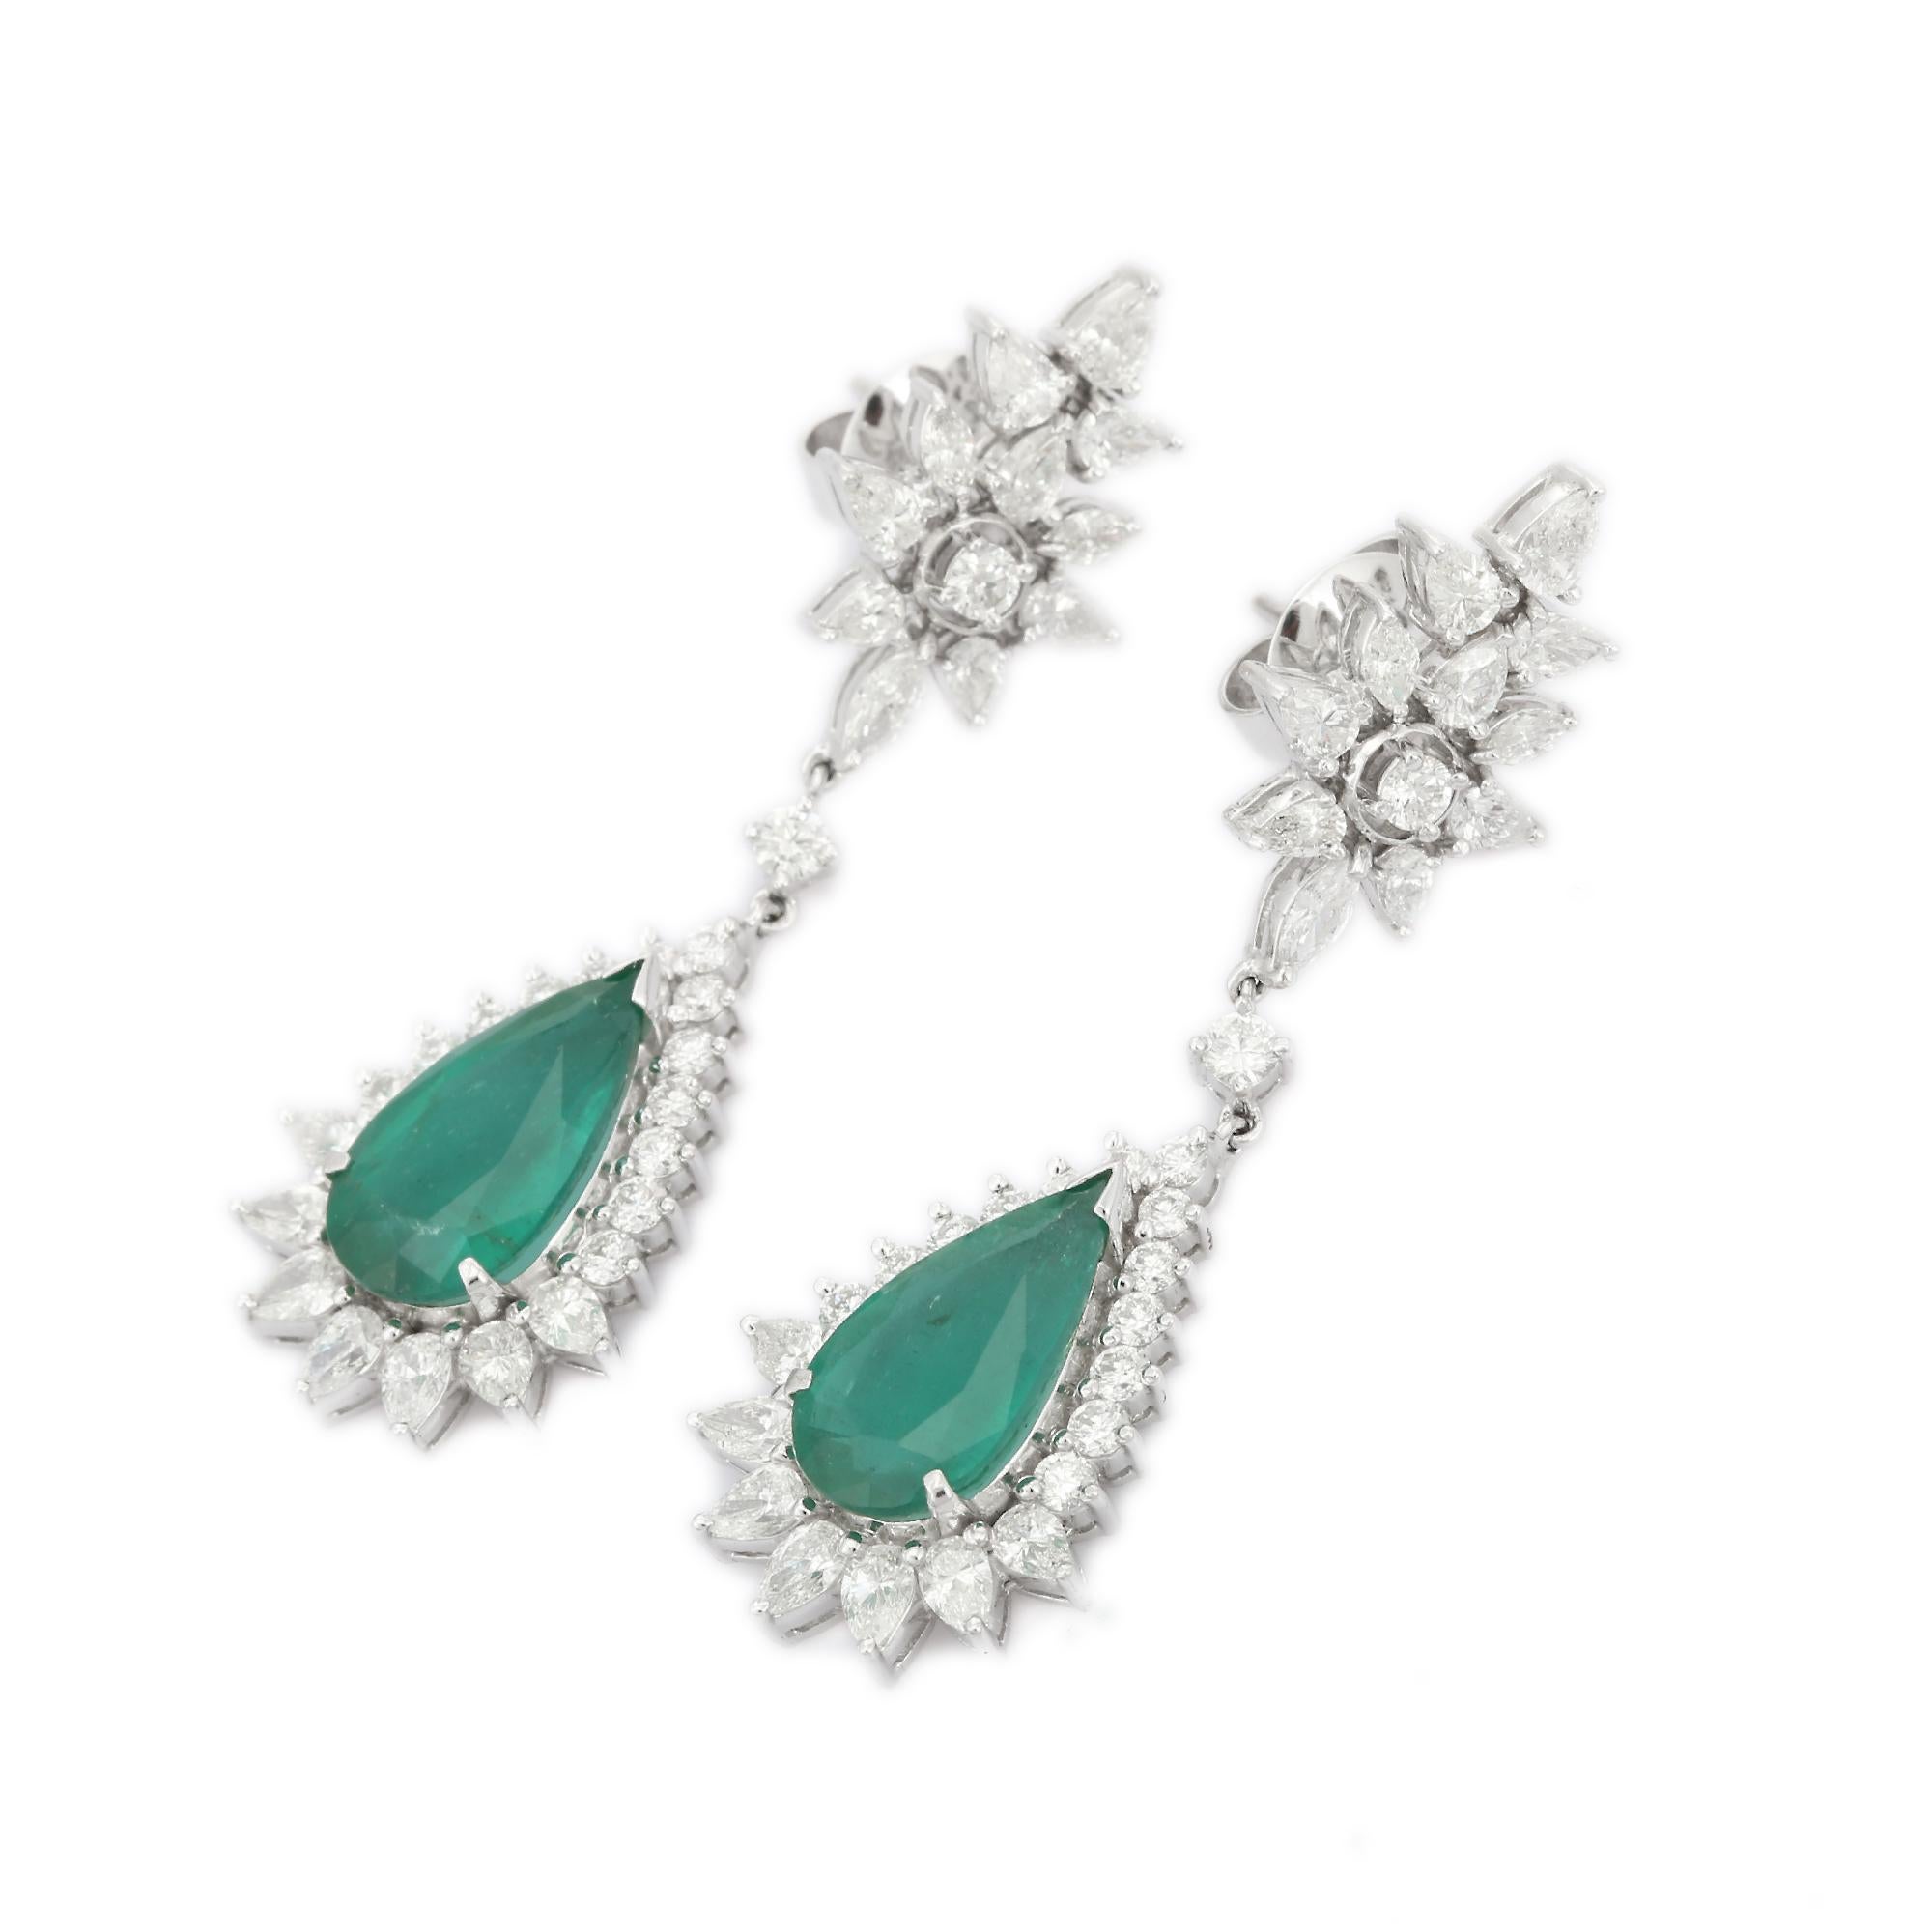 Etincelle Diamond and Pear Emerald Dangle Earrings in 18K Gold to make a statement with your look. You shall need statement dangle earrings to make a statement with your look. These earrings create a sparkling, luxurious look featuring pear cut